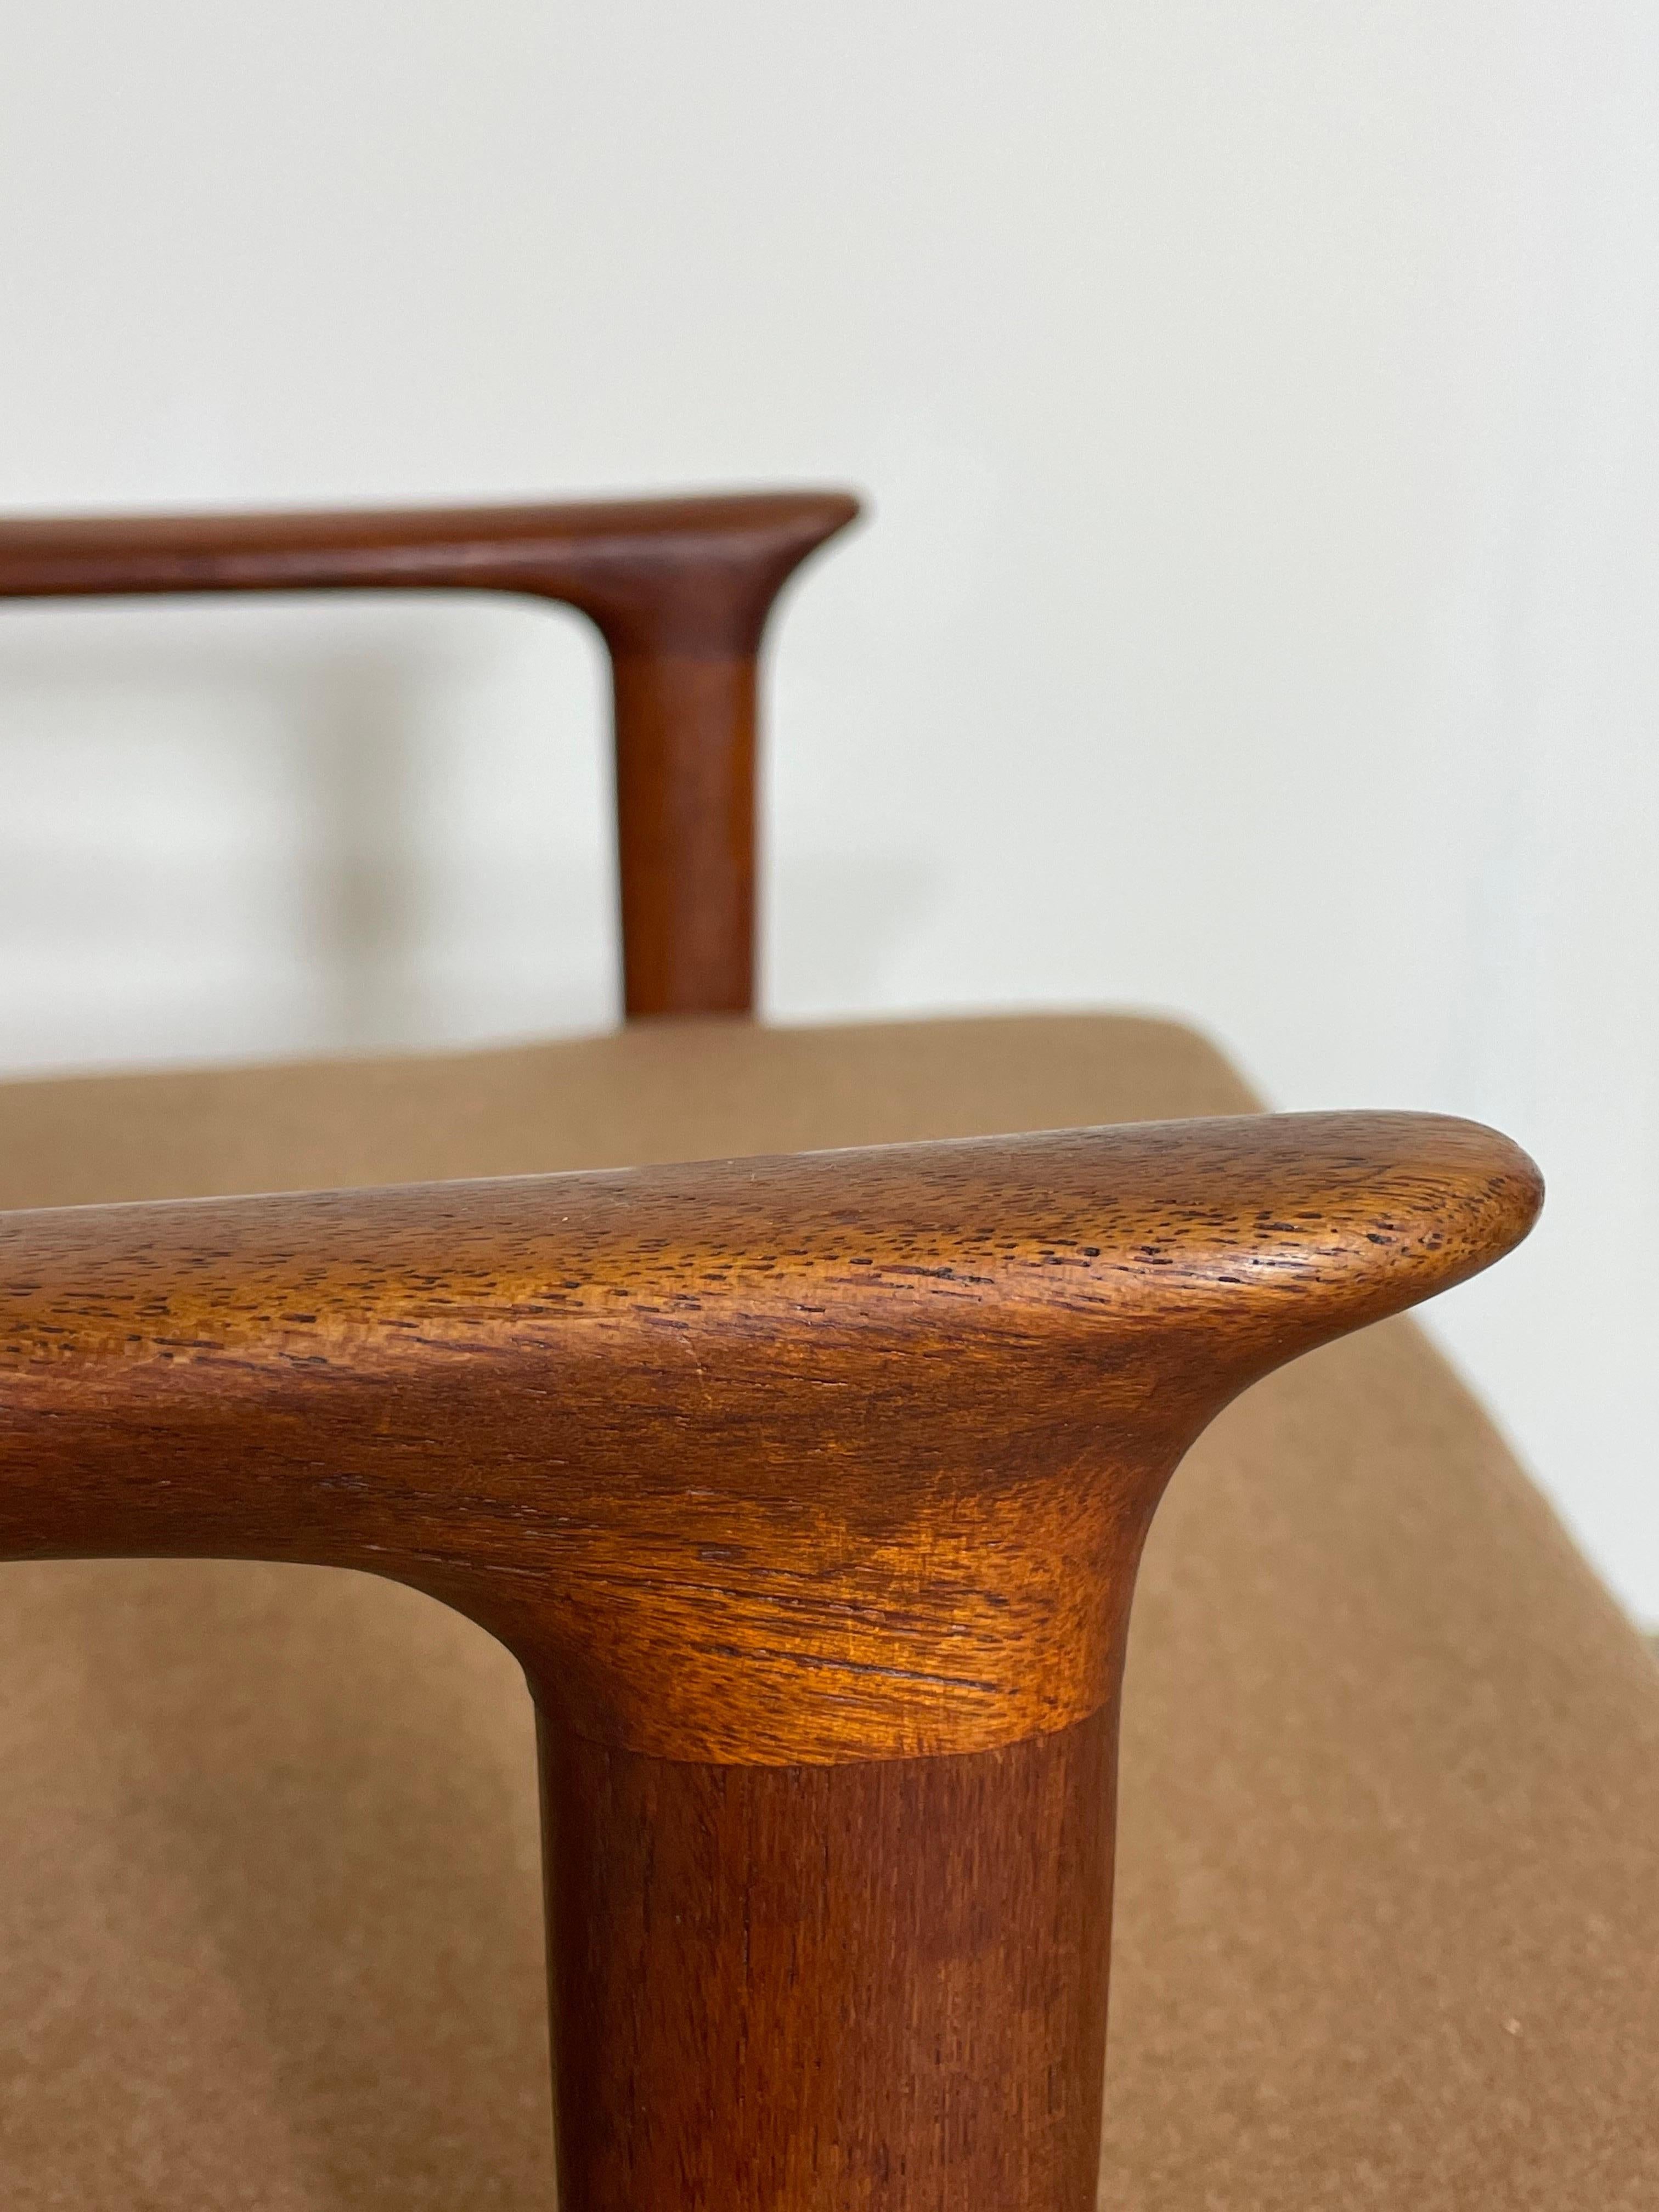 20th Century Nordic Teak Easy Chair by Fredrik A. Kayser 1950s For Sale